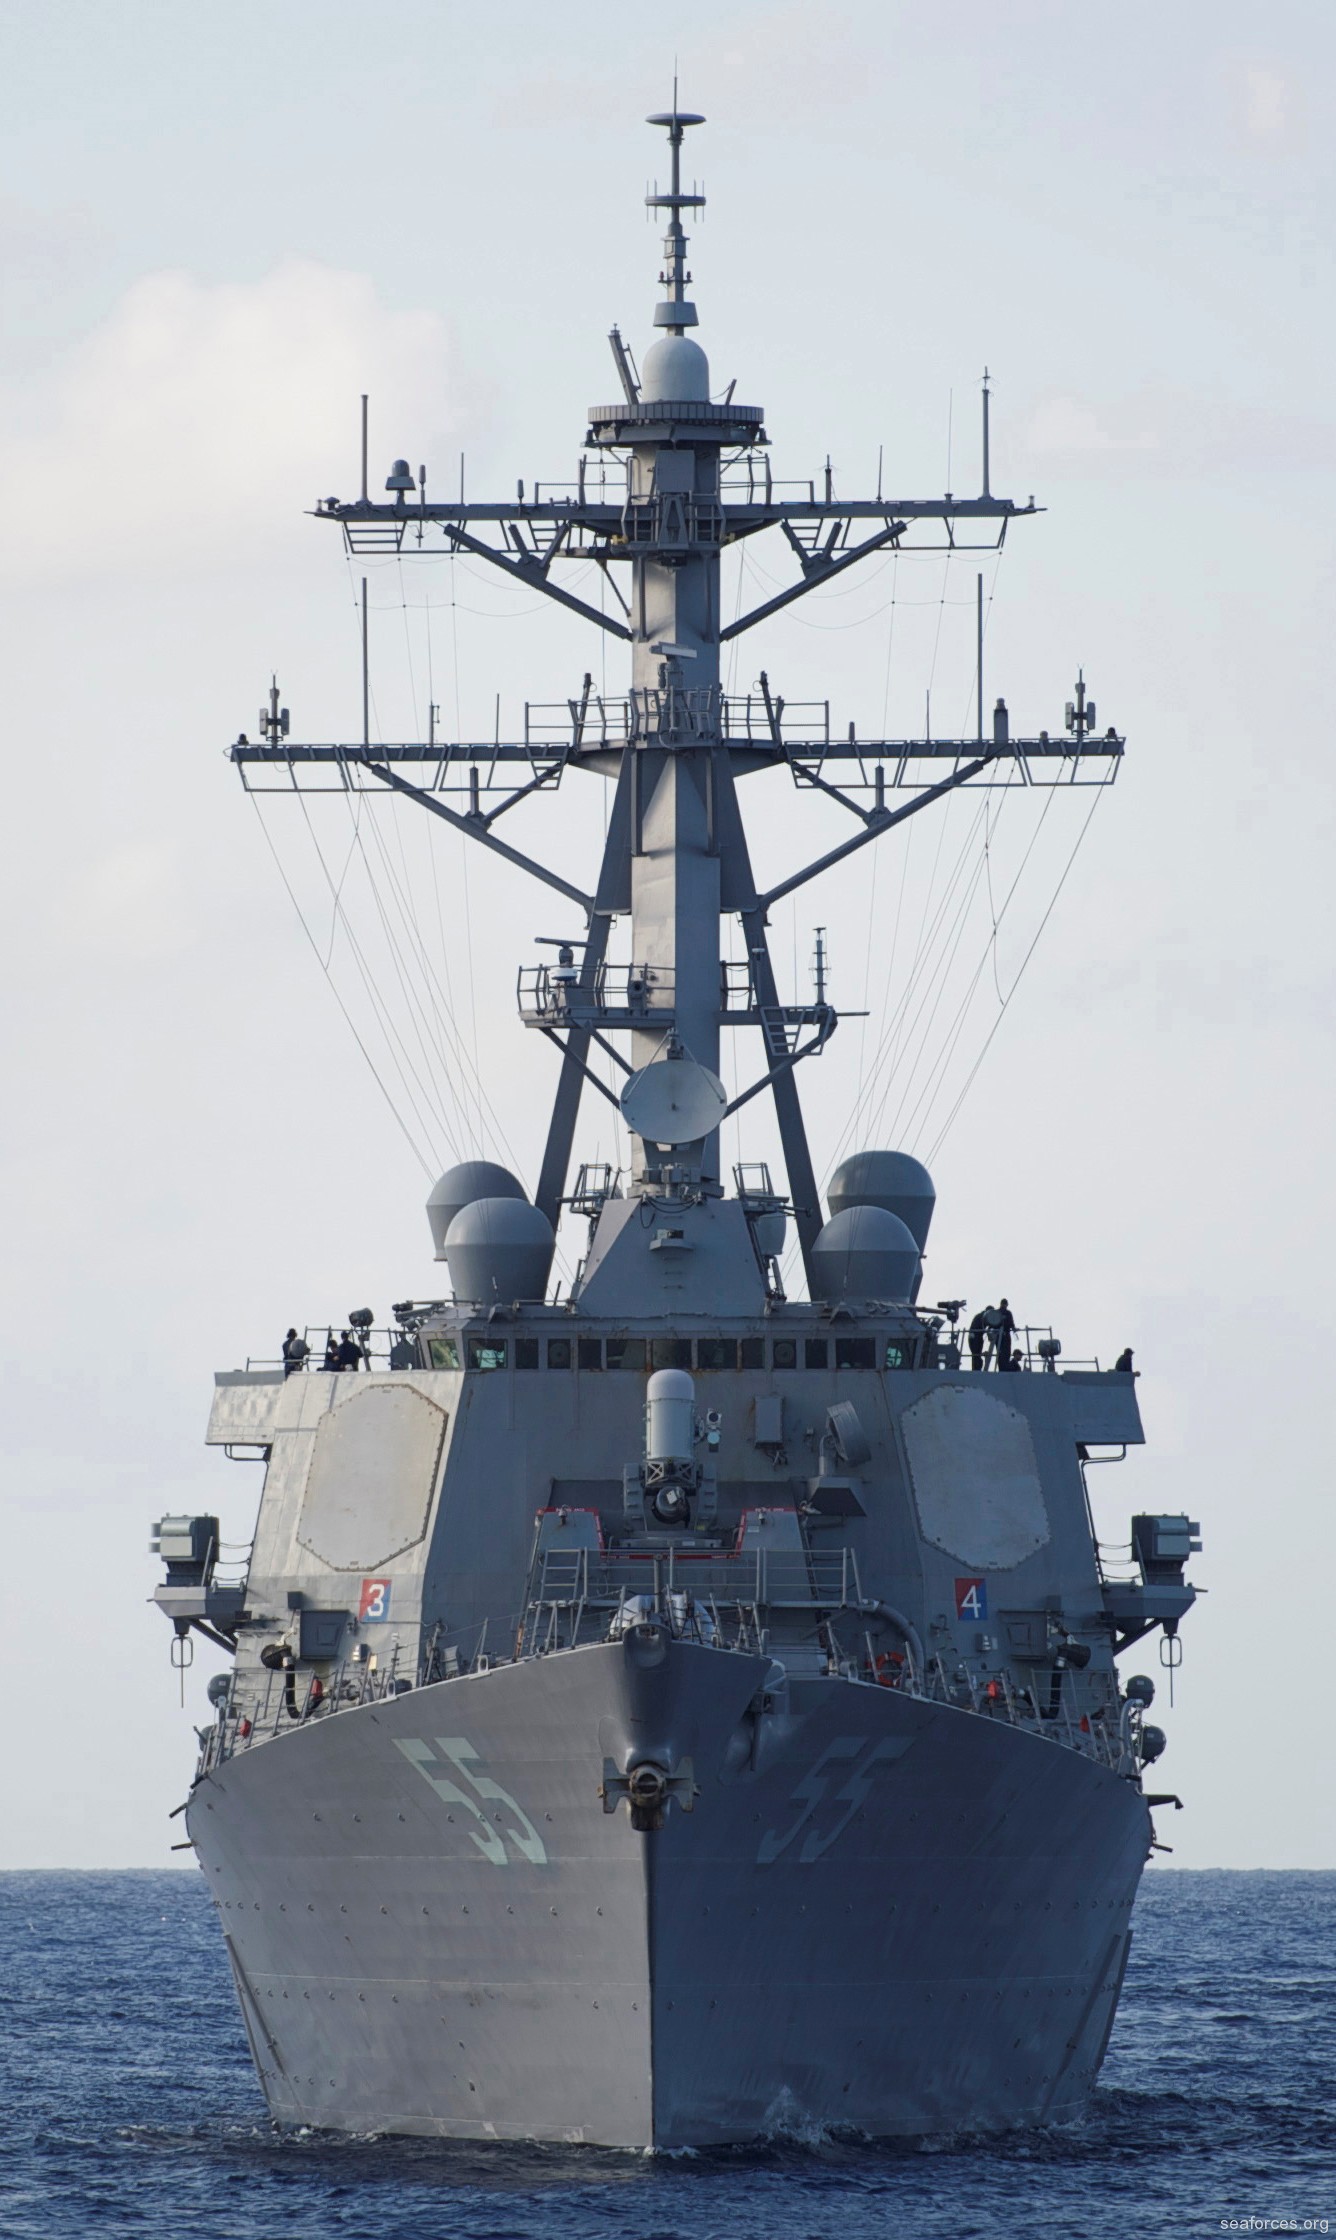 ddg-55 uss stout guided missile destroyer us navy 68 aegis combat system